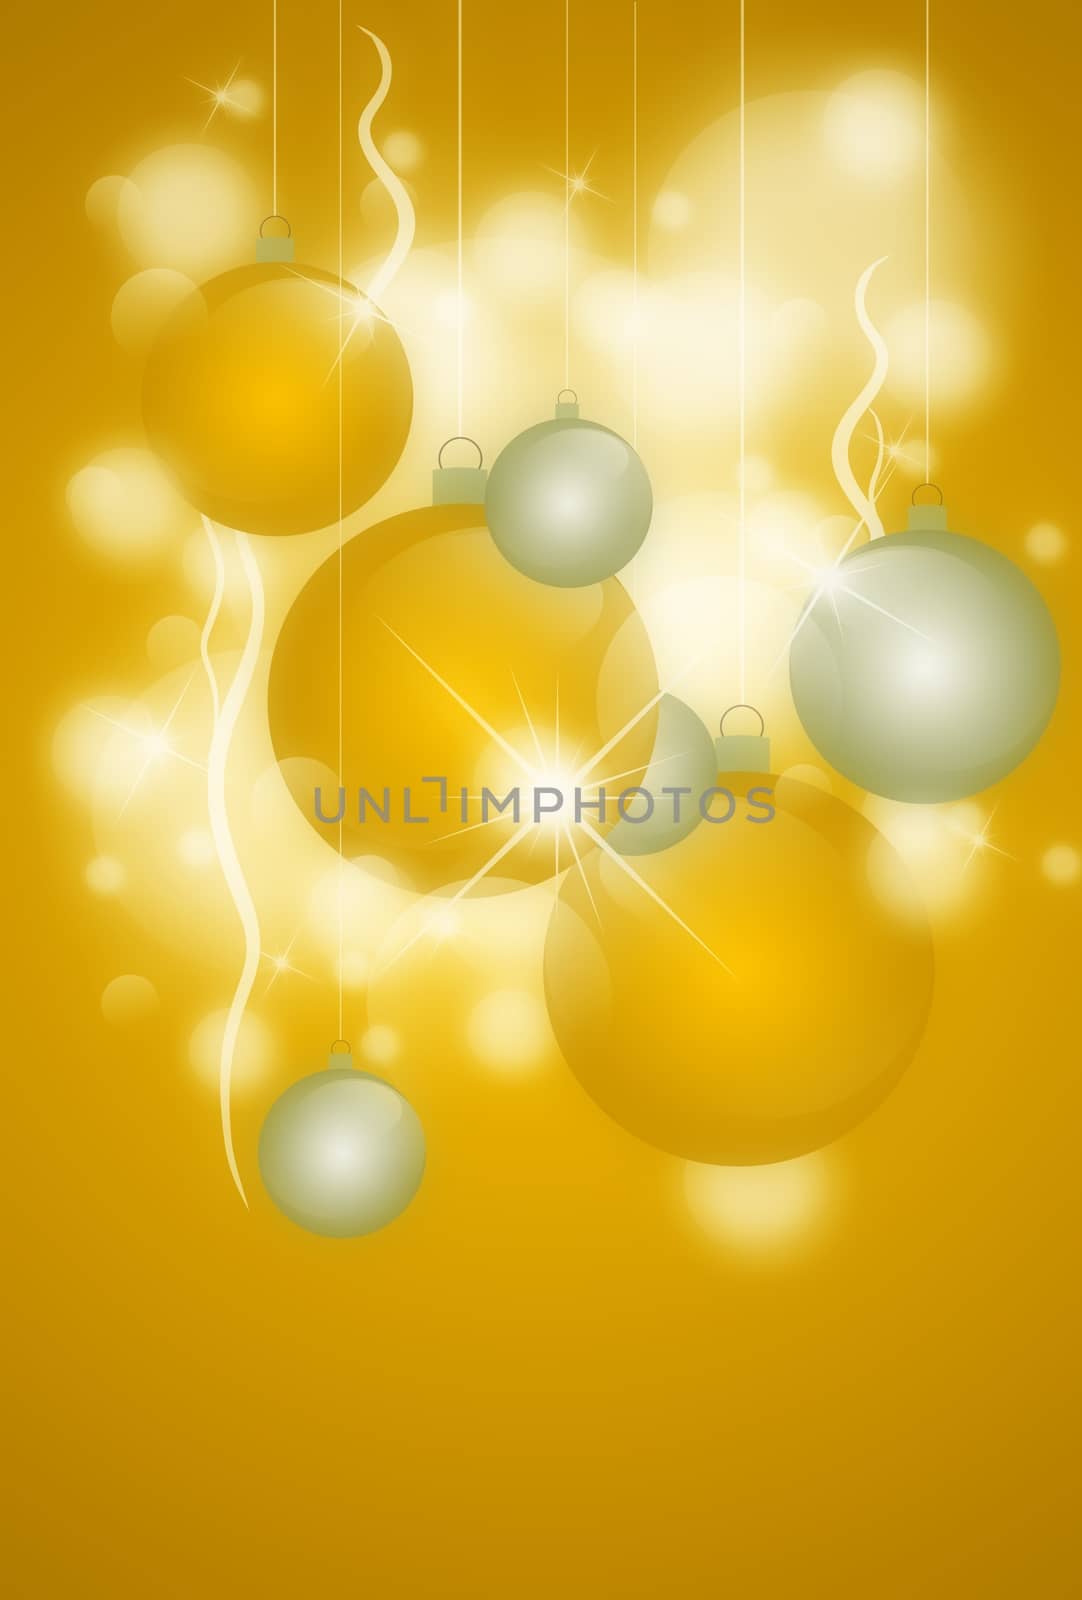 Golden Christmas. Simple Christmas Theme - Illustration. Golden Colors. Glowing Particles and Christmas Ornaments